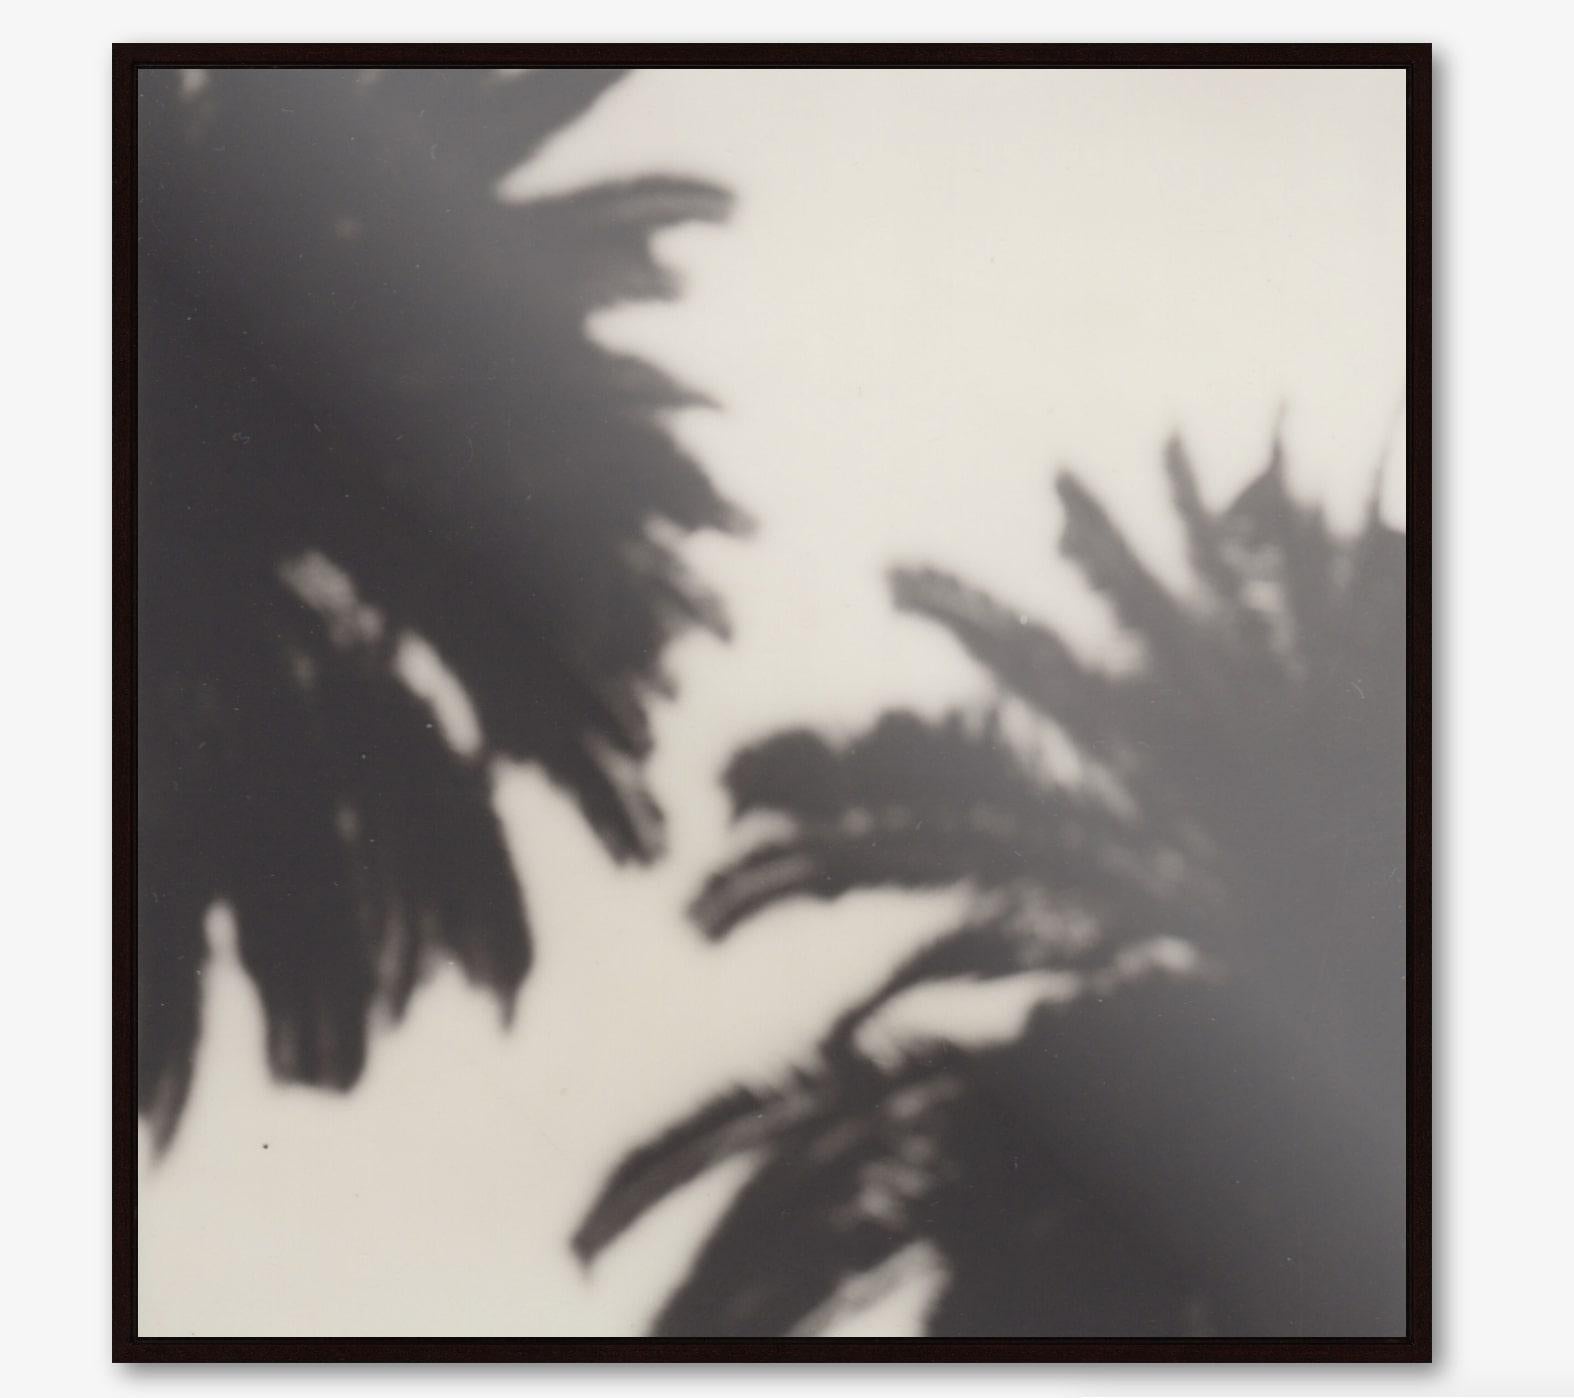 Calm as a Palm - 21st Century Contemporary Black and White Photographic Print, Polaroid Original, Shadow Gapped Frame - Photographic Print on Aluminium Dibond - Edition of 10 + 1, with Certificate

Calm as a Palm is a beautiful example of Pia